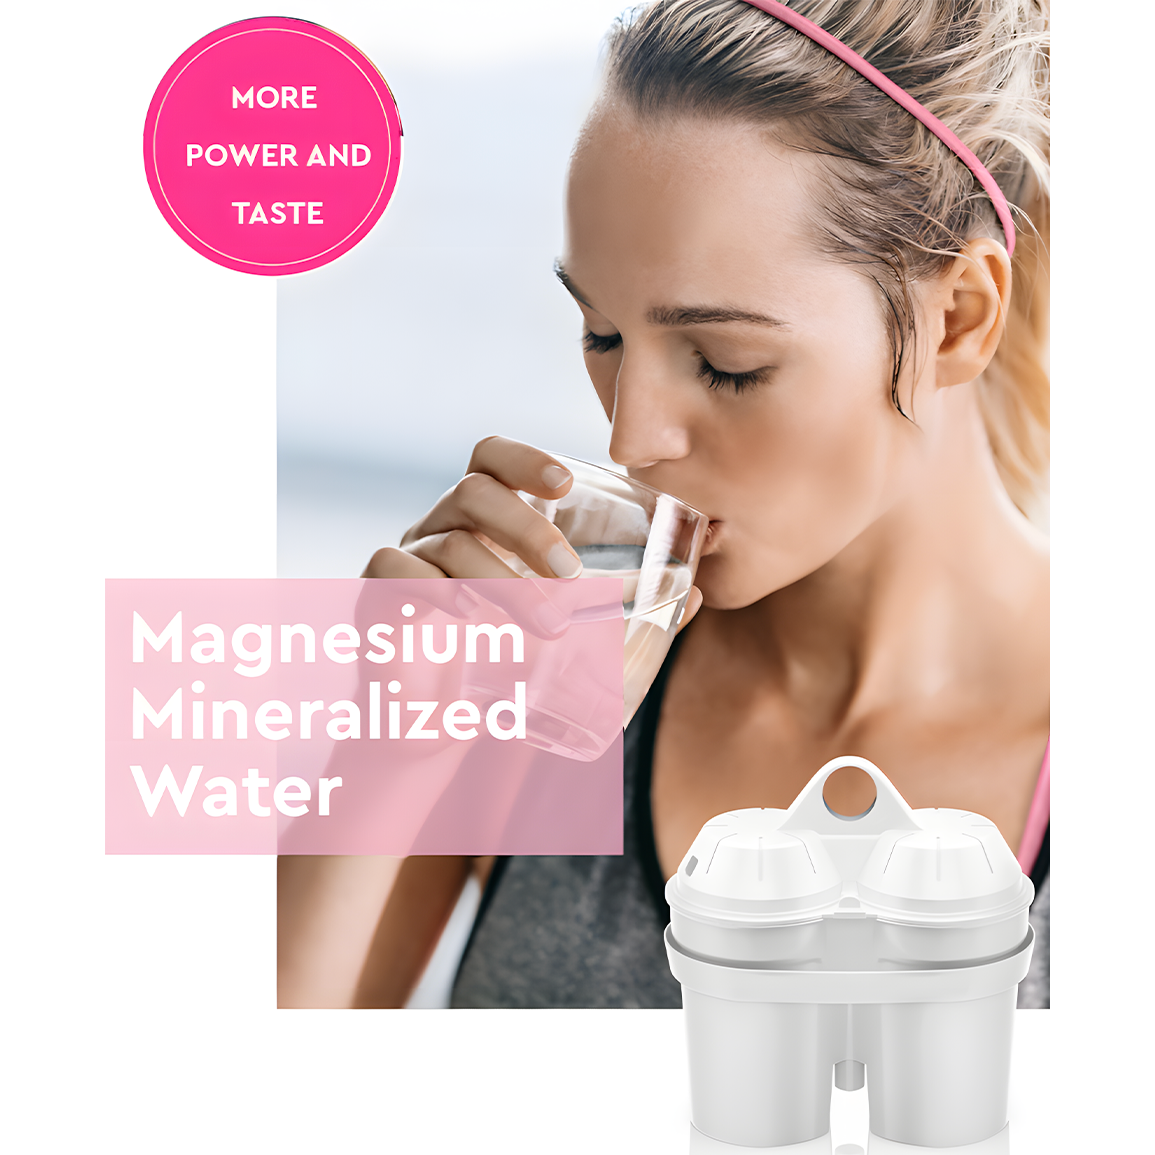 Magnesium Mineralized Water